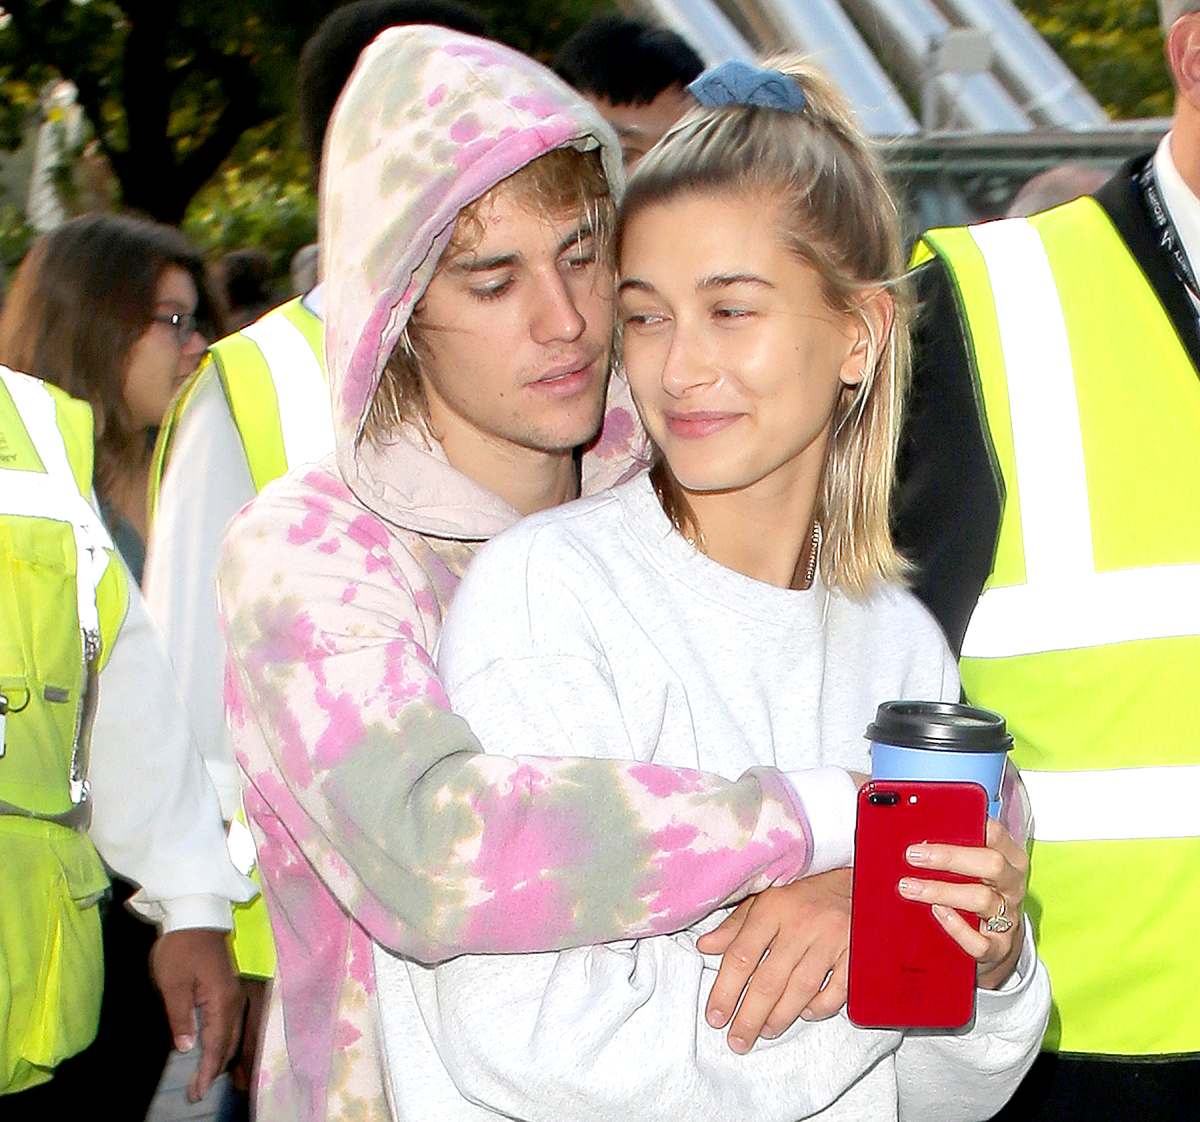 Justin Bieber's new pot-Scoot Braun manager? His wife Hailey